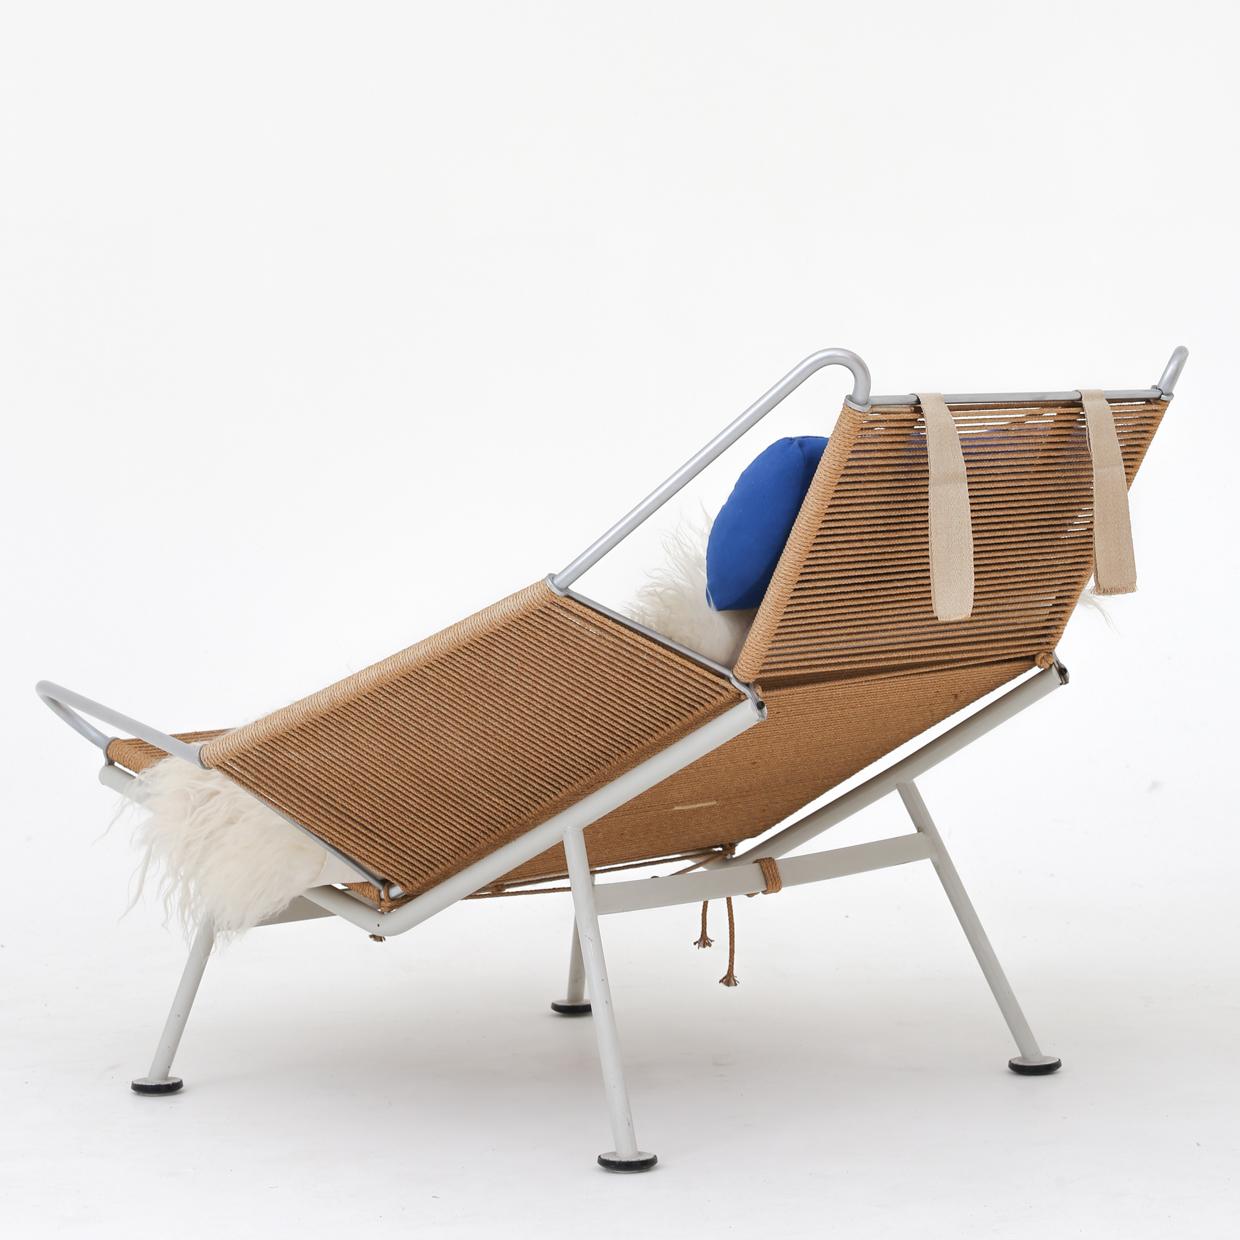 GE 225 - Early 'Flag Halyard Chair' with original white lacquered steel frame and patinated flagline with blue cushion. Designed in 1950. Maker Getama.